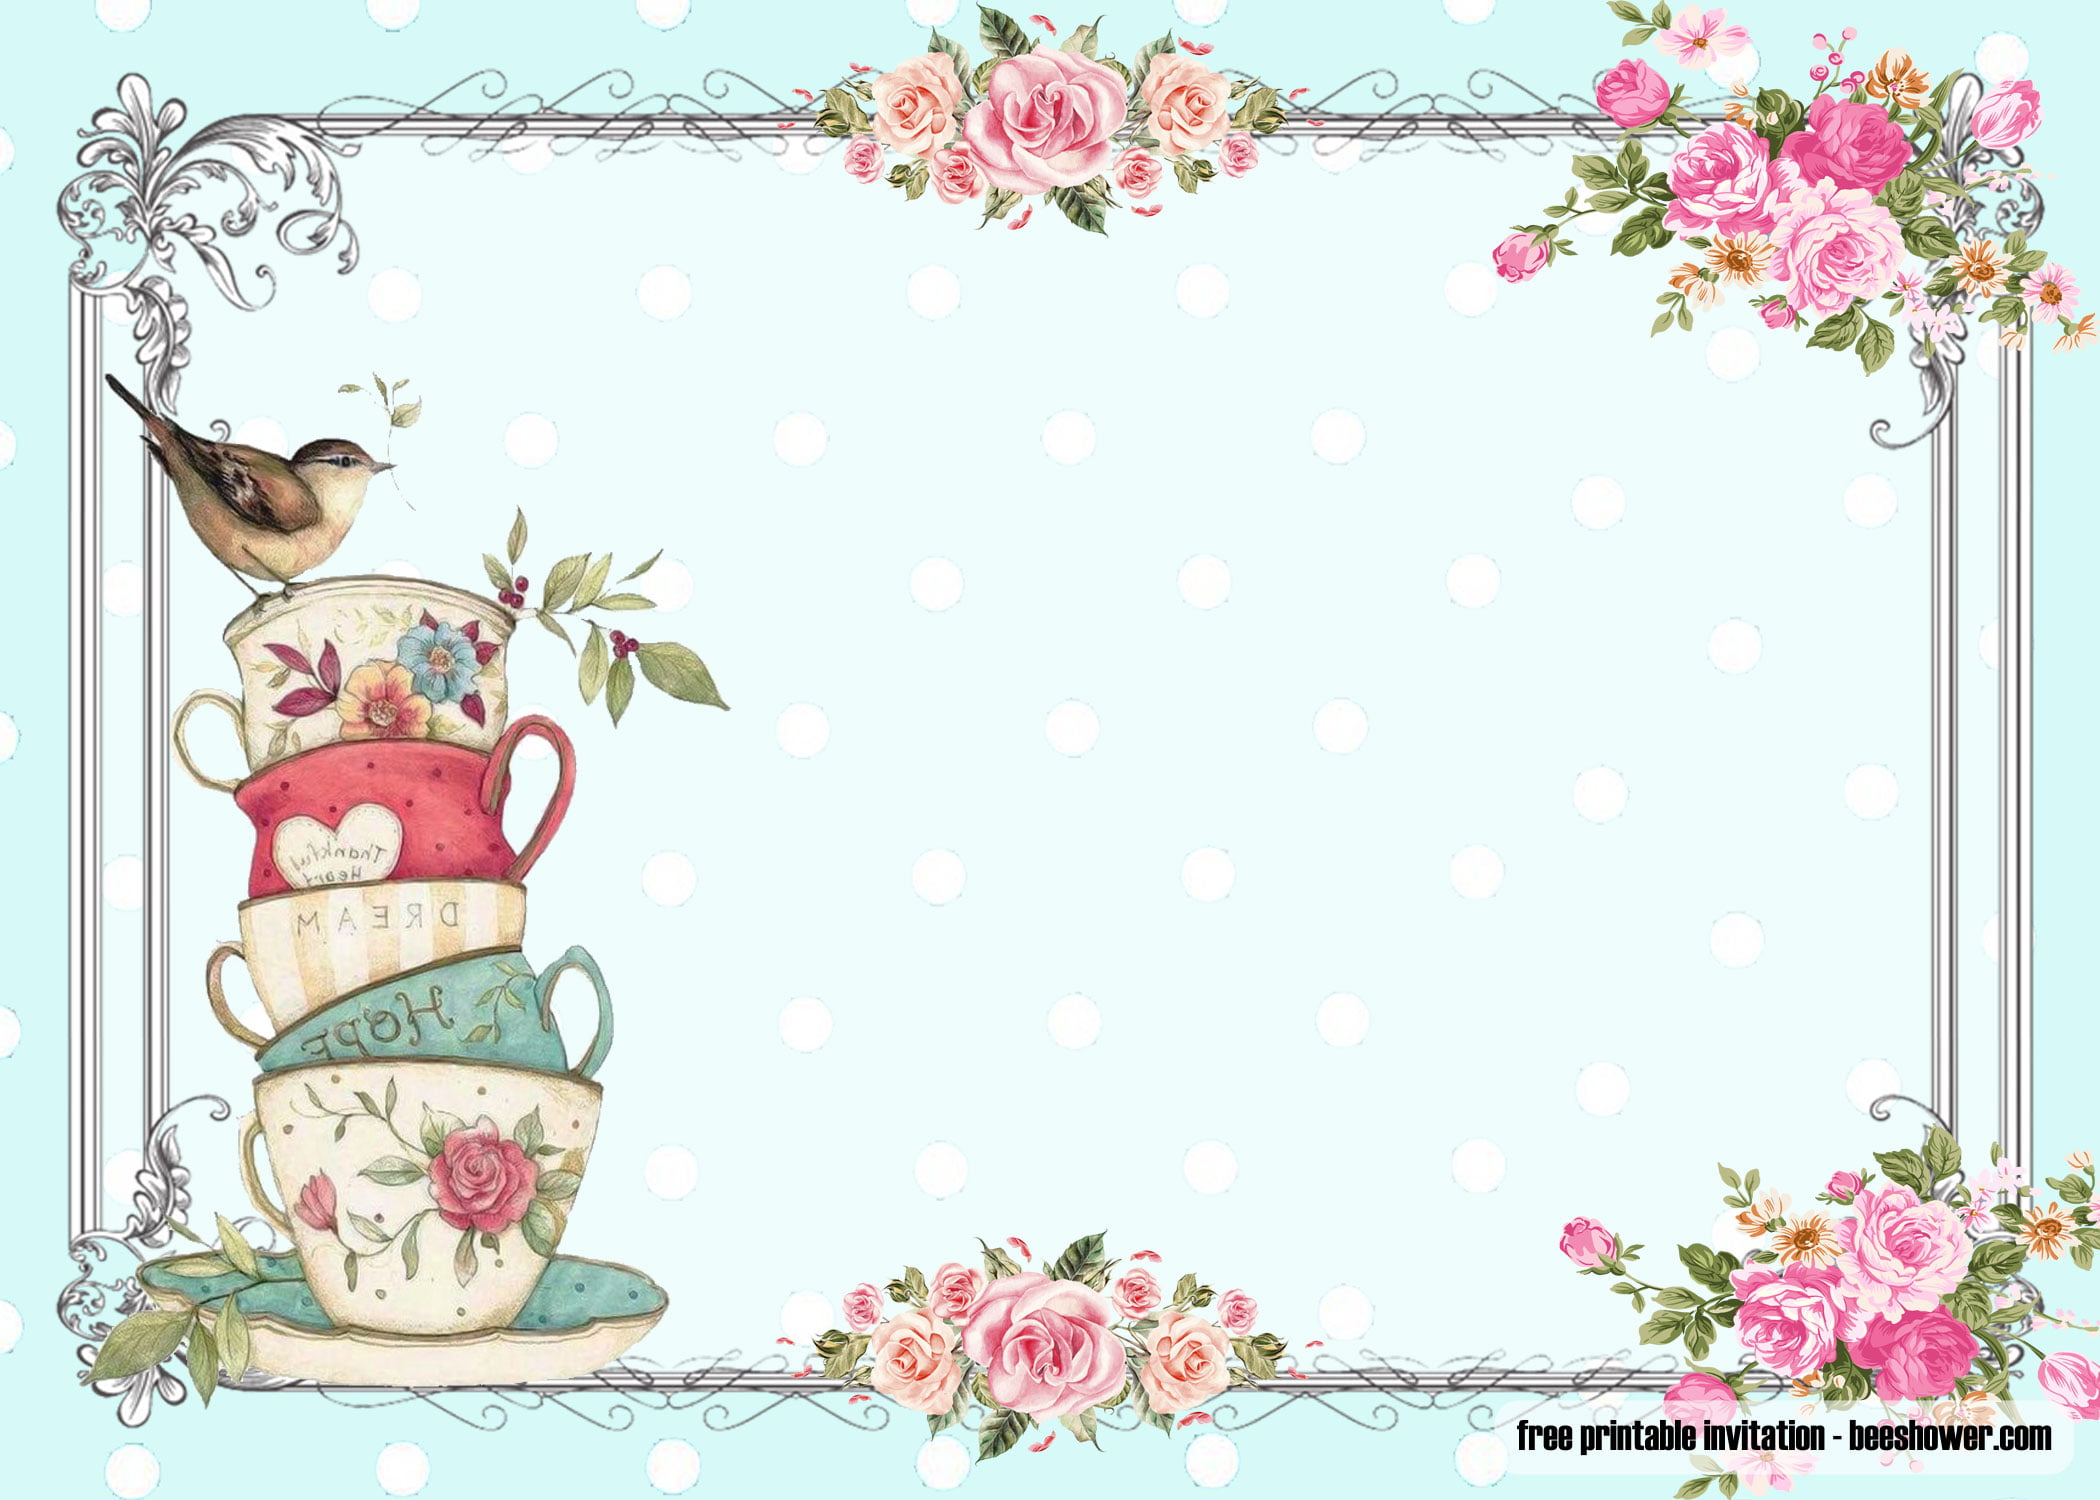 FREE Vintage Tea Party Baby Shower Invitations Download Hundreds FREE